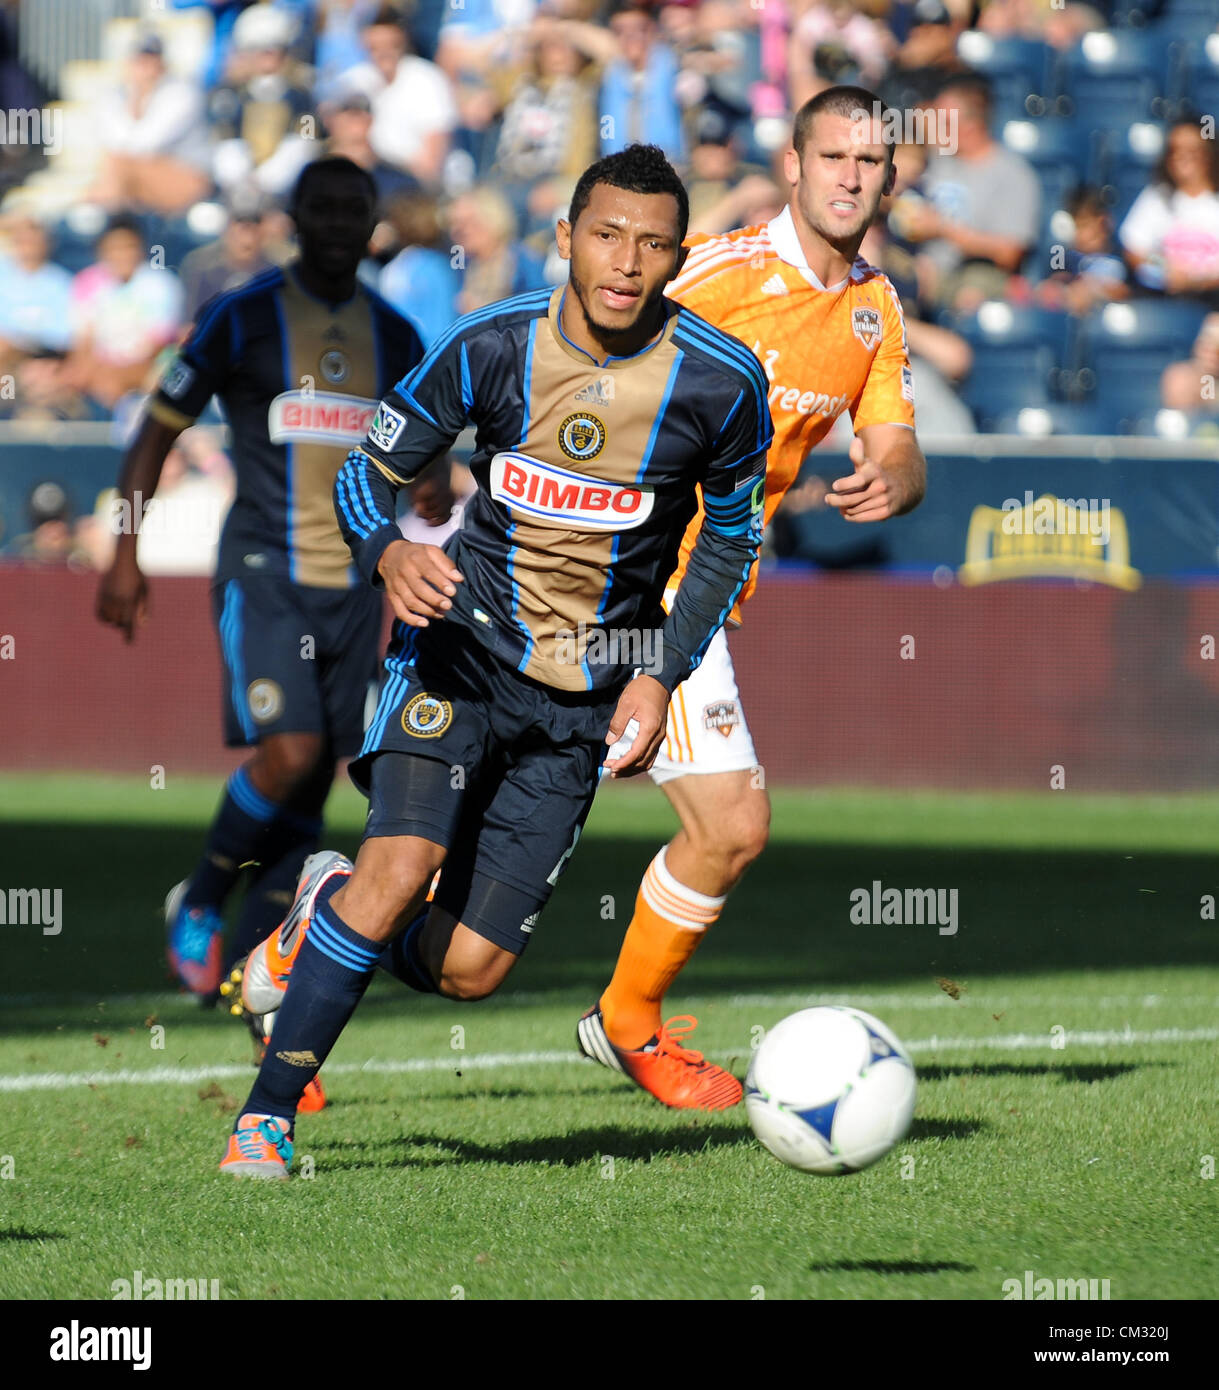 Sept. 23, 2012 - Chester, Pennsylvania, U.S - Union's,  CARLOS VALDES in action against Houston. The Union won the match 3-1 at PPL Park (Credit Image: © Ricky Fitchett/ZUMAPRESS.com) Stock Photo